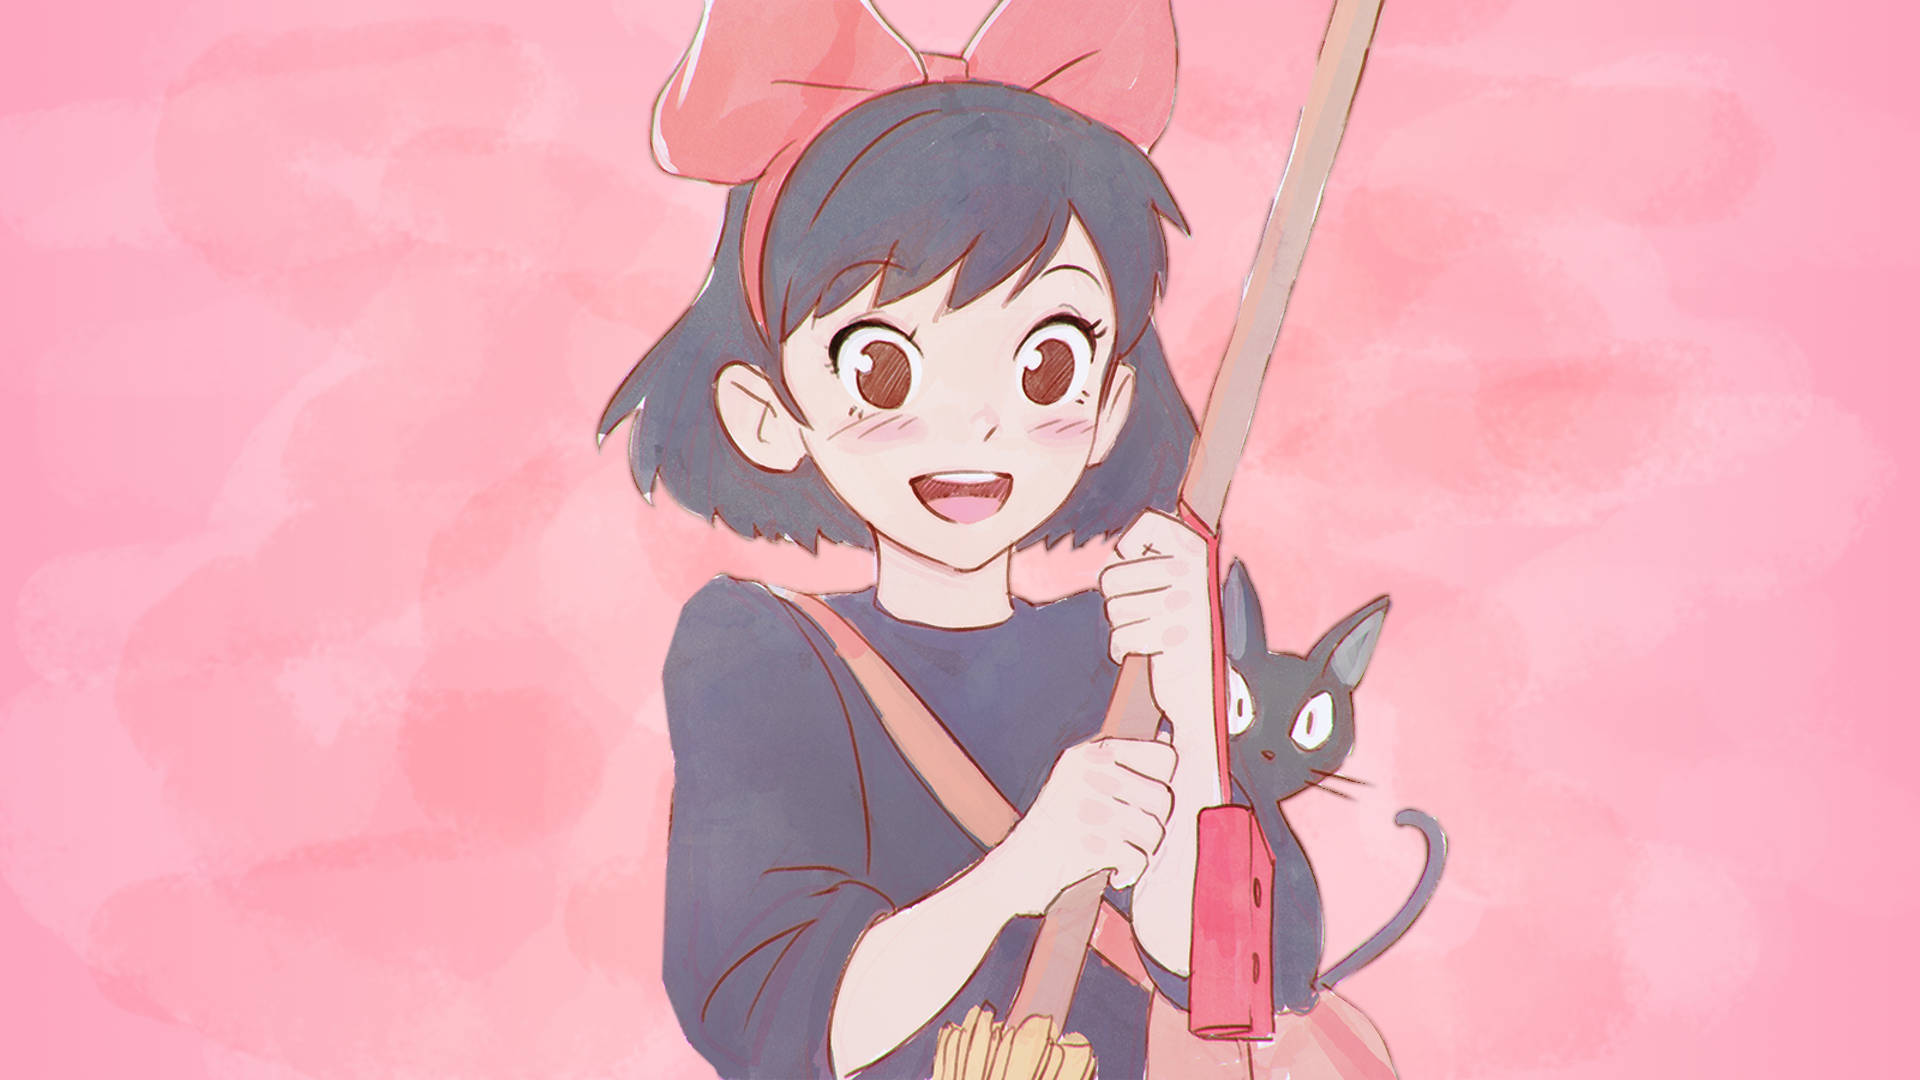 Kikis Delivery Service Wallpaper Pictures